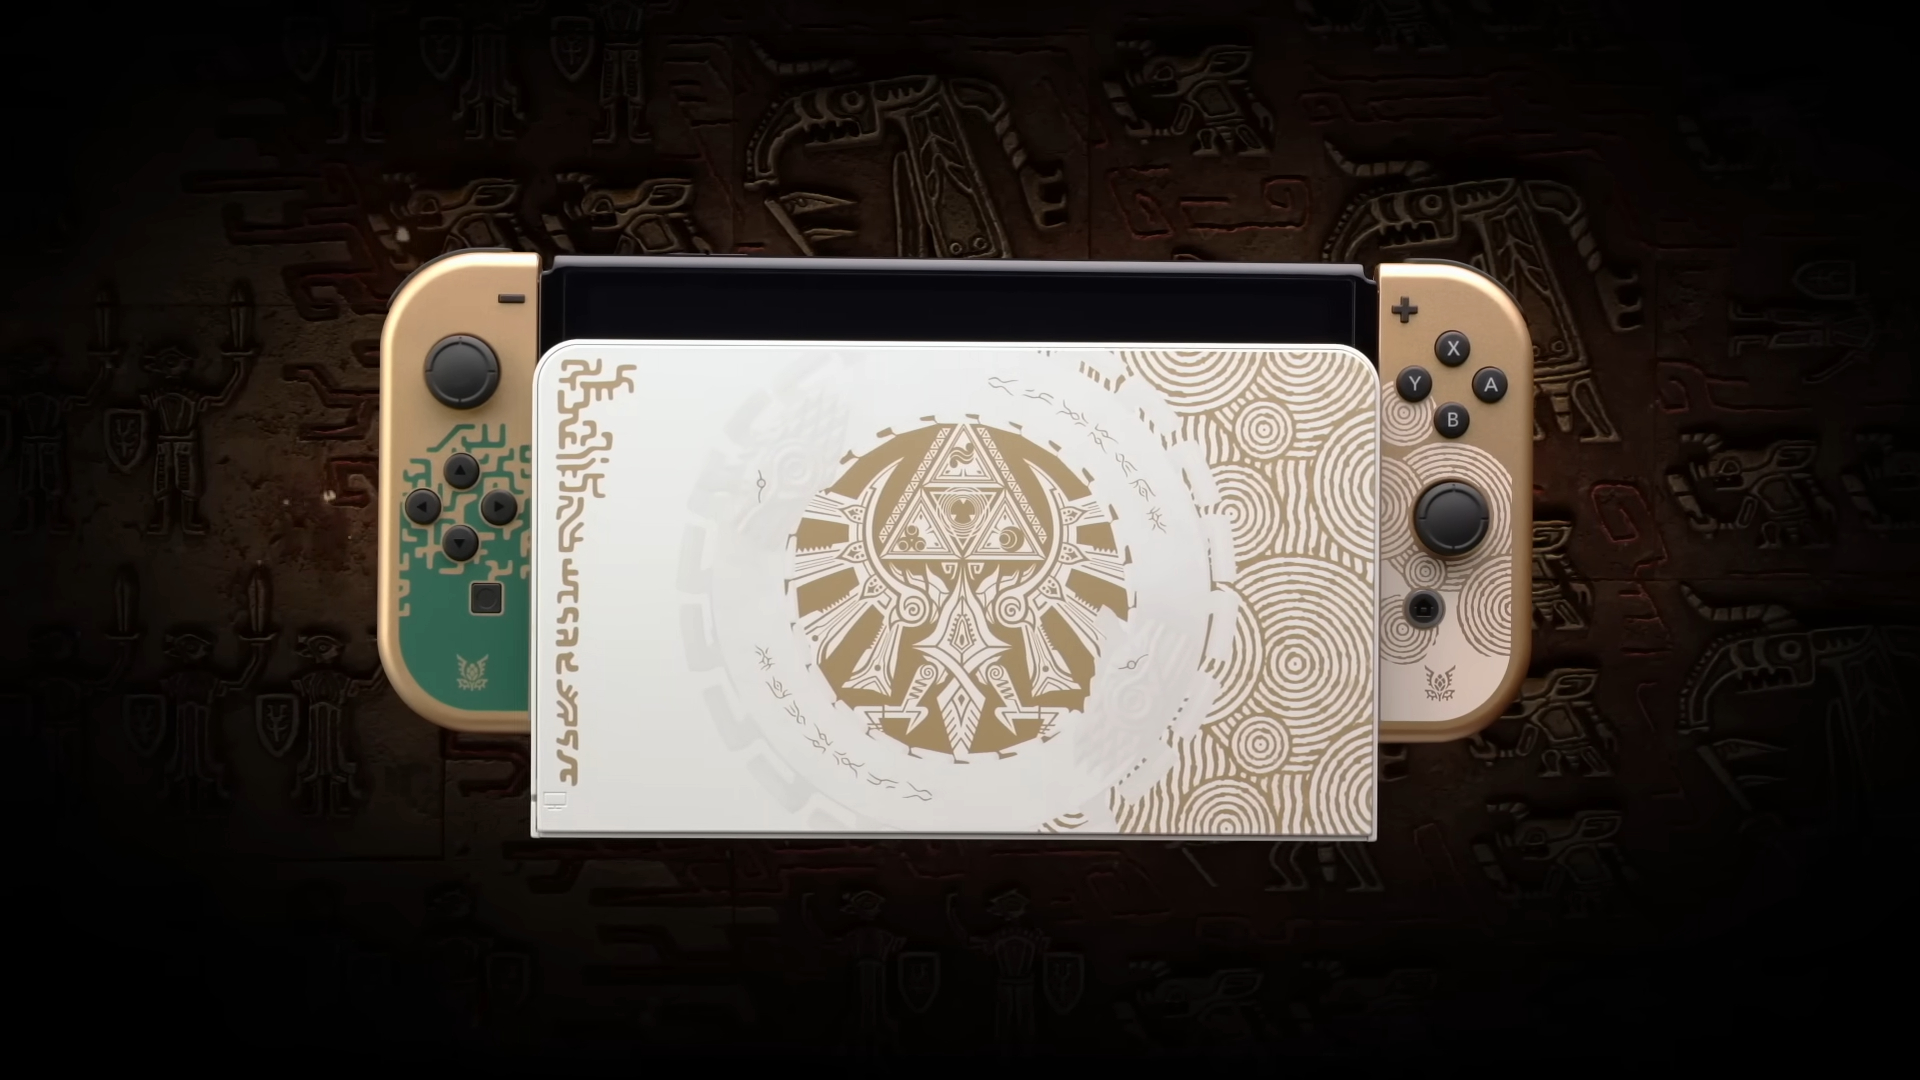 Nintendo Switch OLED Zelda Edition on sale during Prime Day